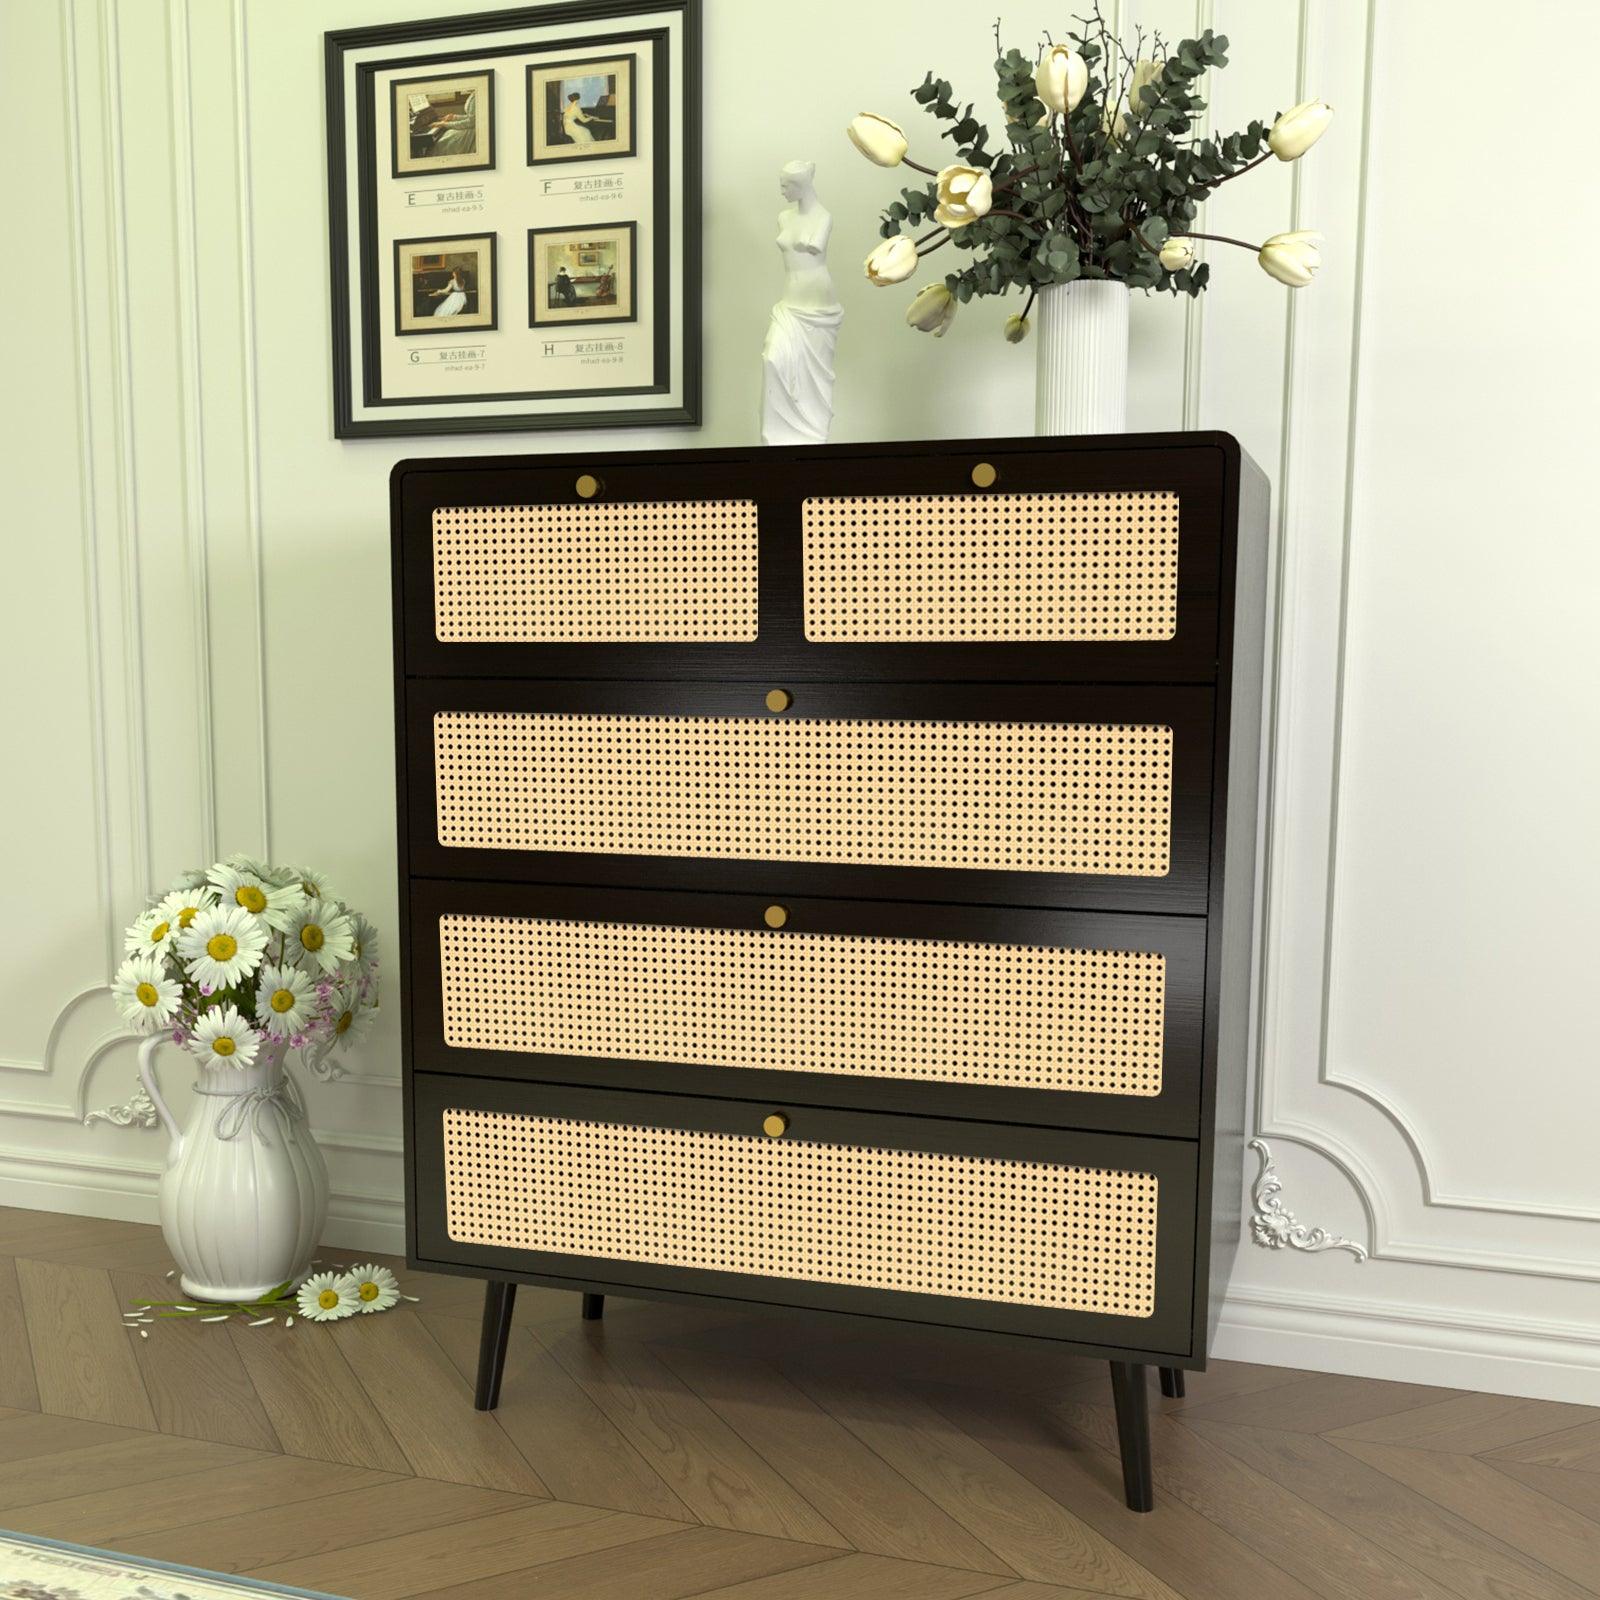 🆓🚛 4 Drawer Dresser, Modern Rattan Dresser Chest With Wide Drawers & Metal Handles, Farmhouse Wood Storage Chest of Drawers for Bedroom, Living Room, Hallway, Entryway